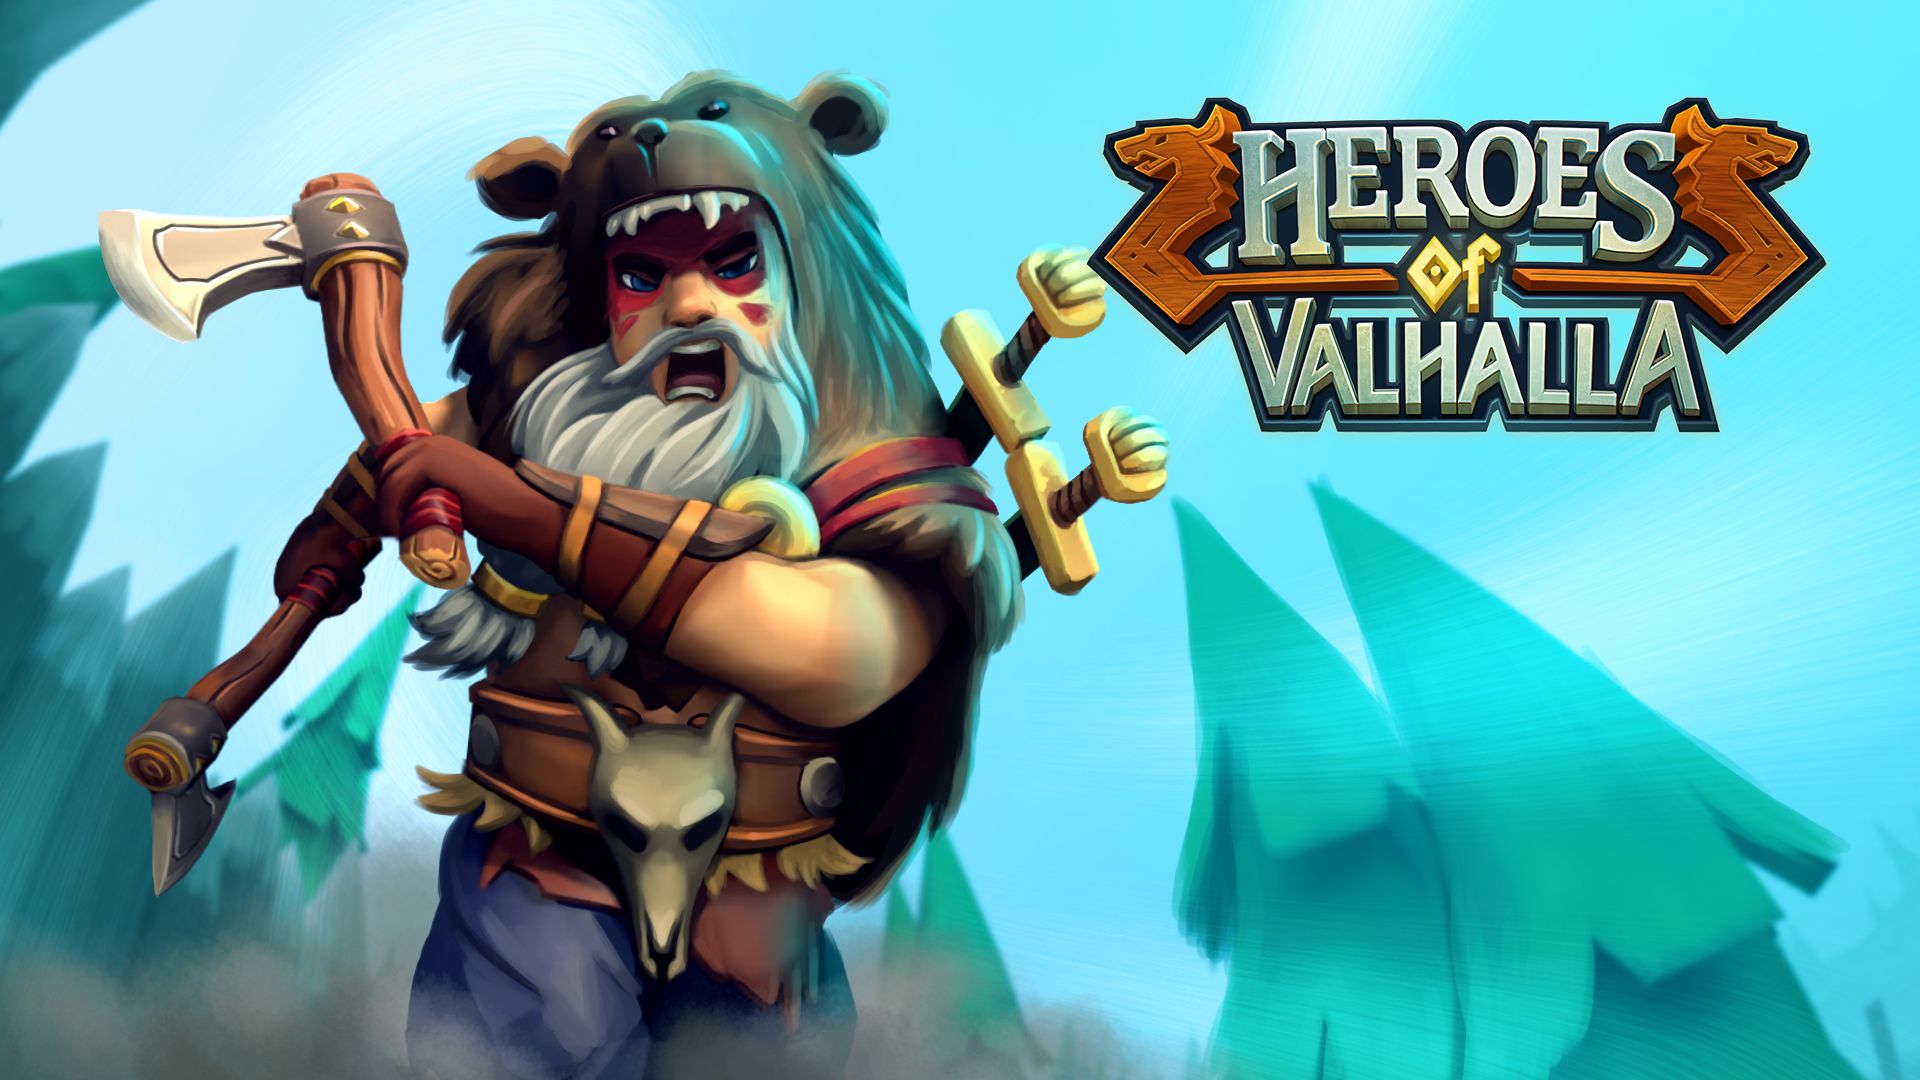 Scarica Heroes of Valhalla gratis per Android.